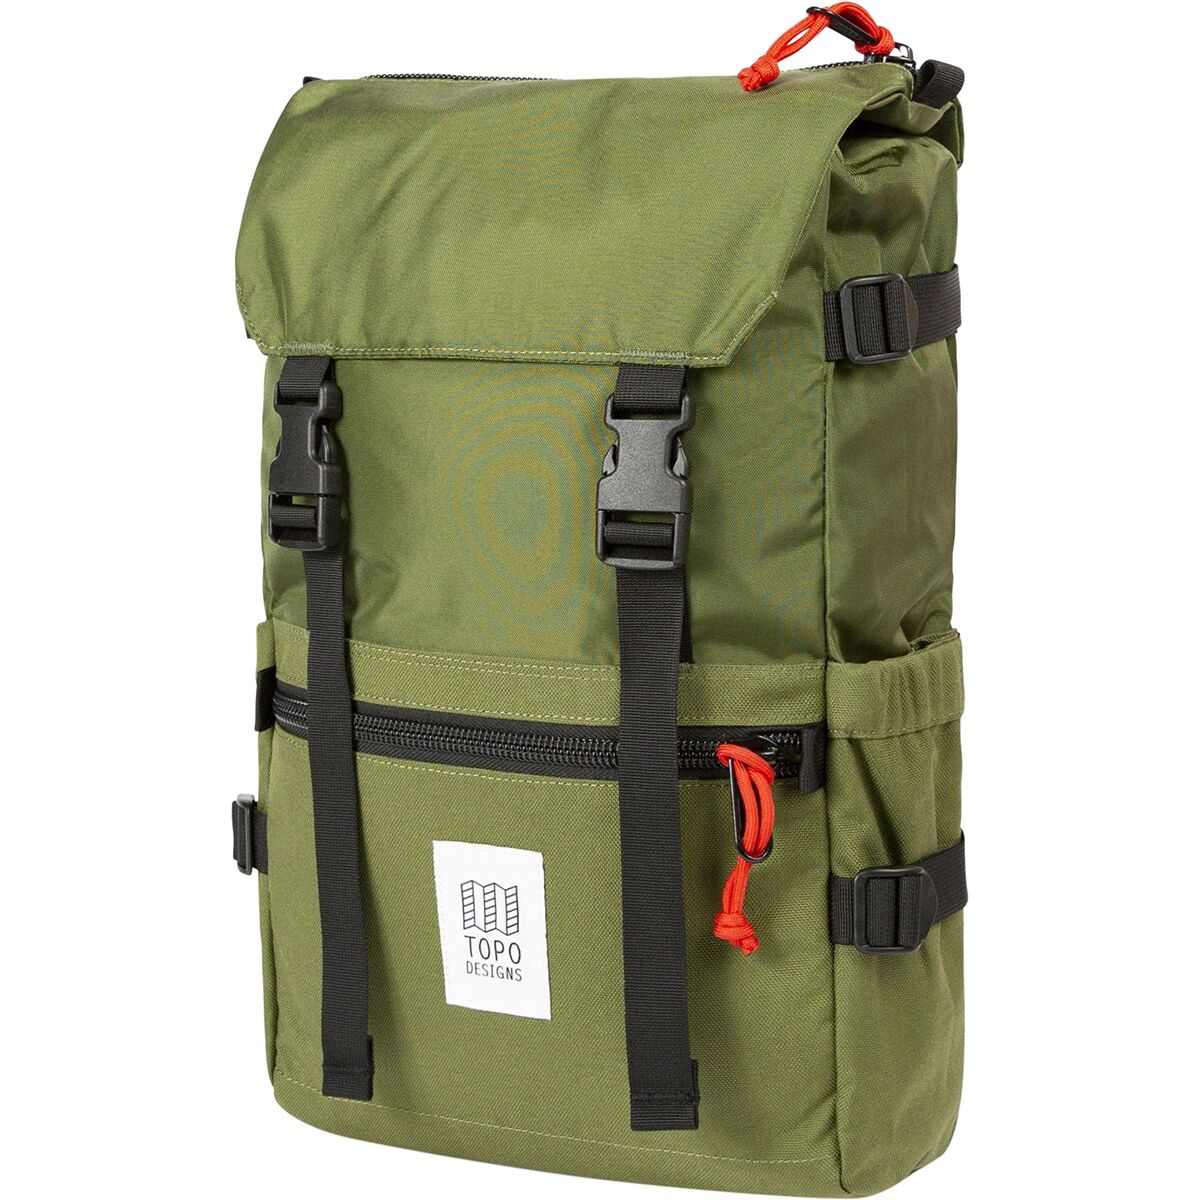 Photos - Backpack Rover 20L Pack